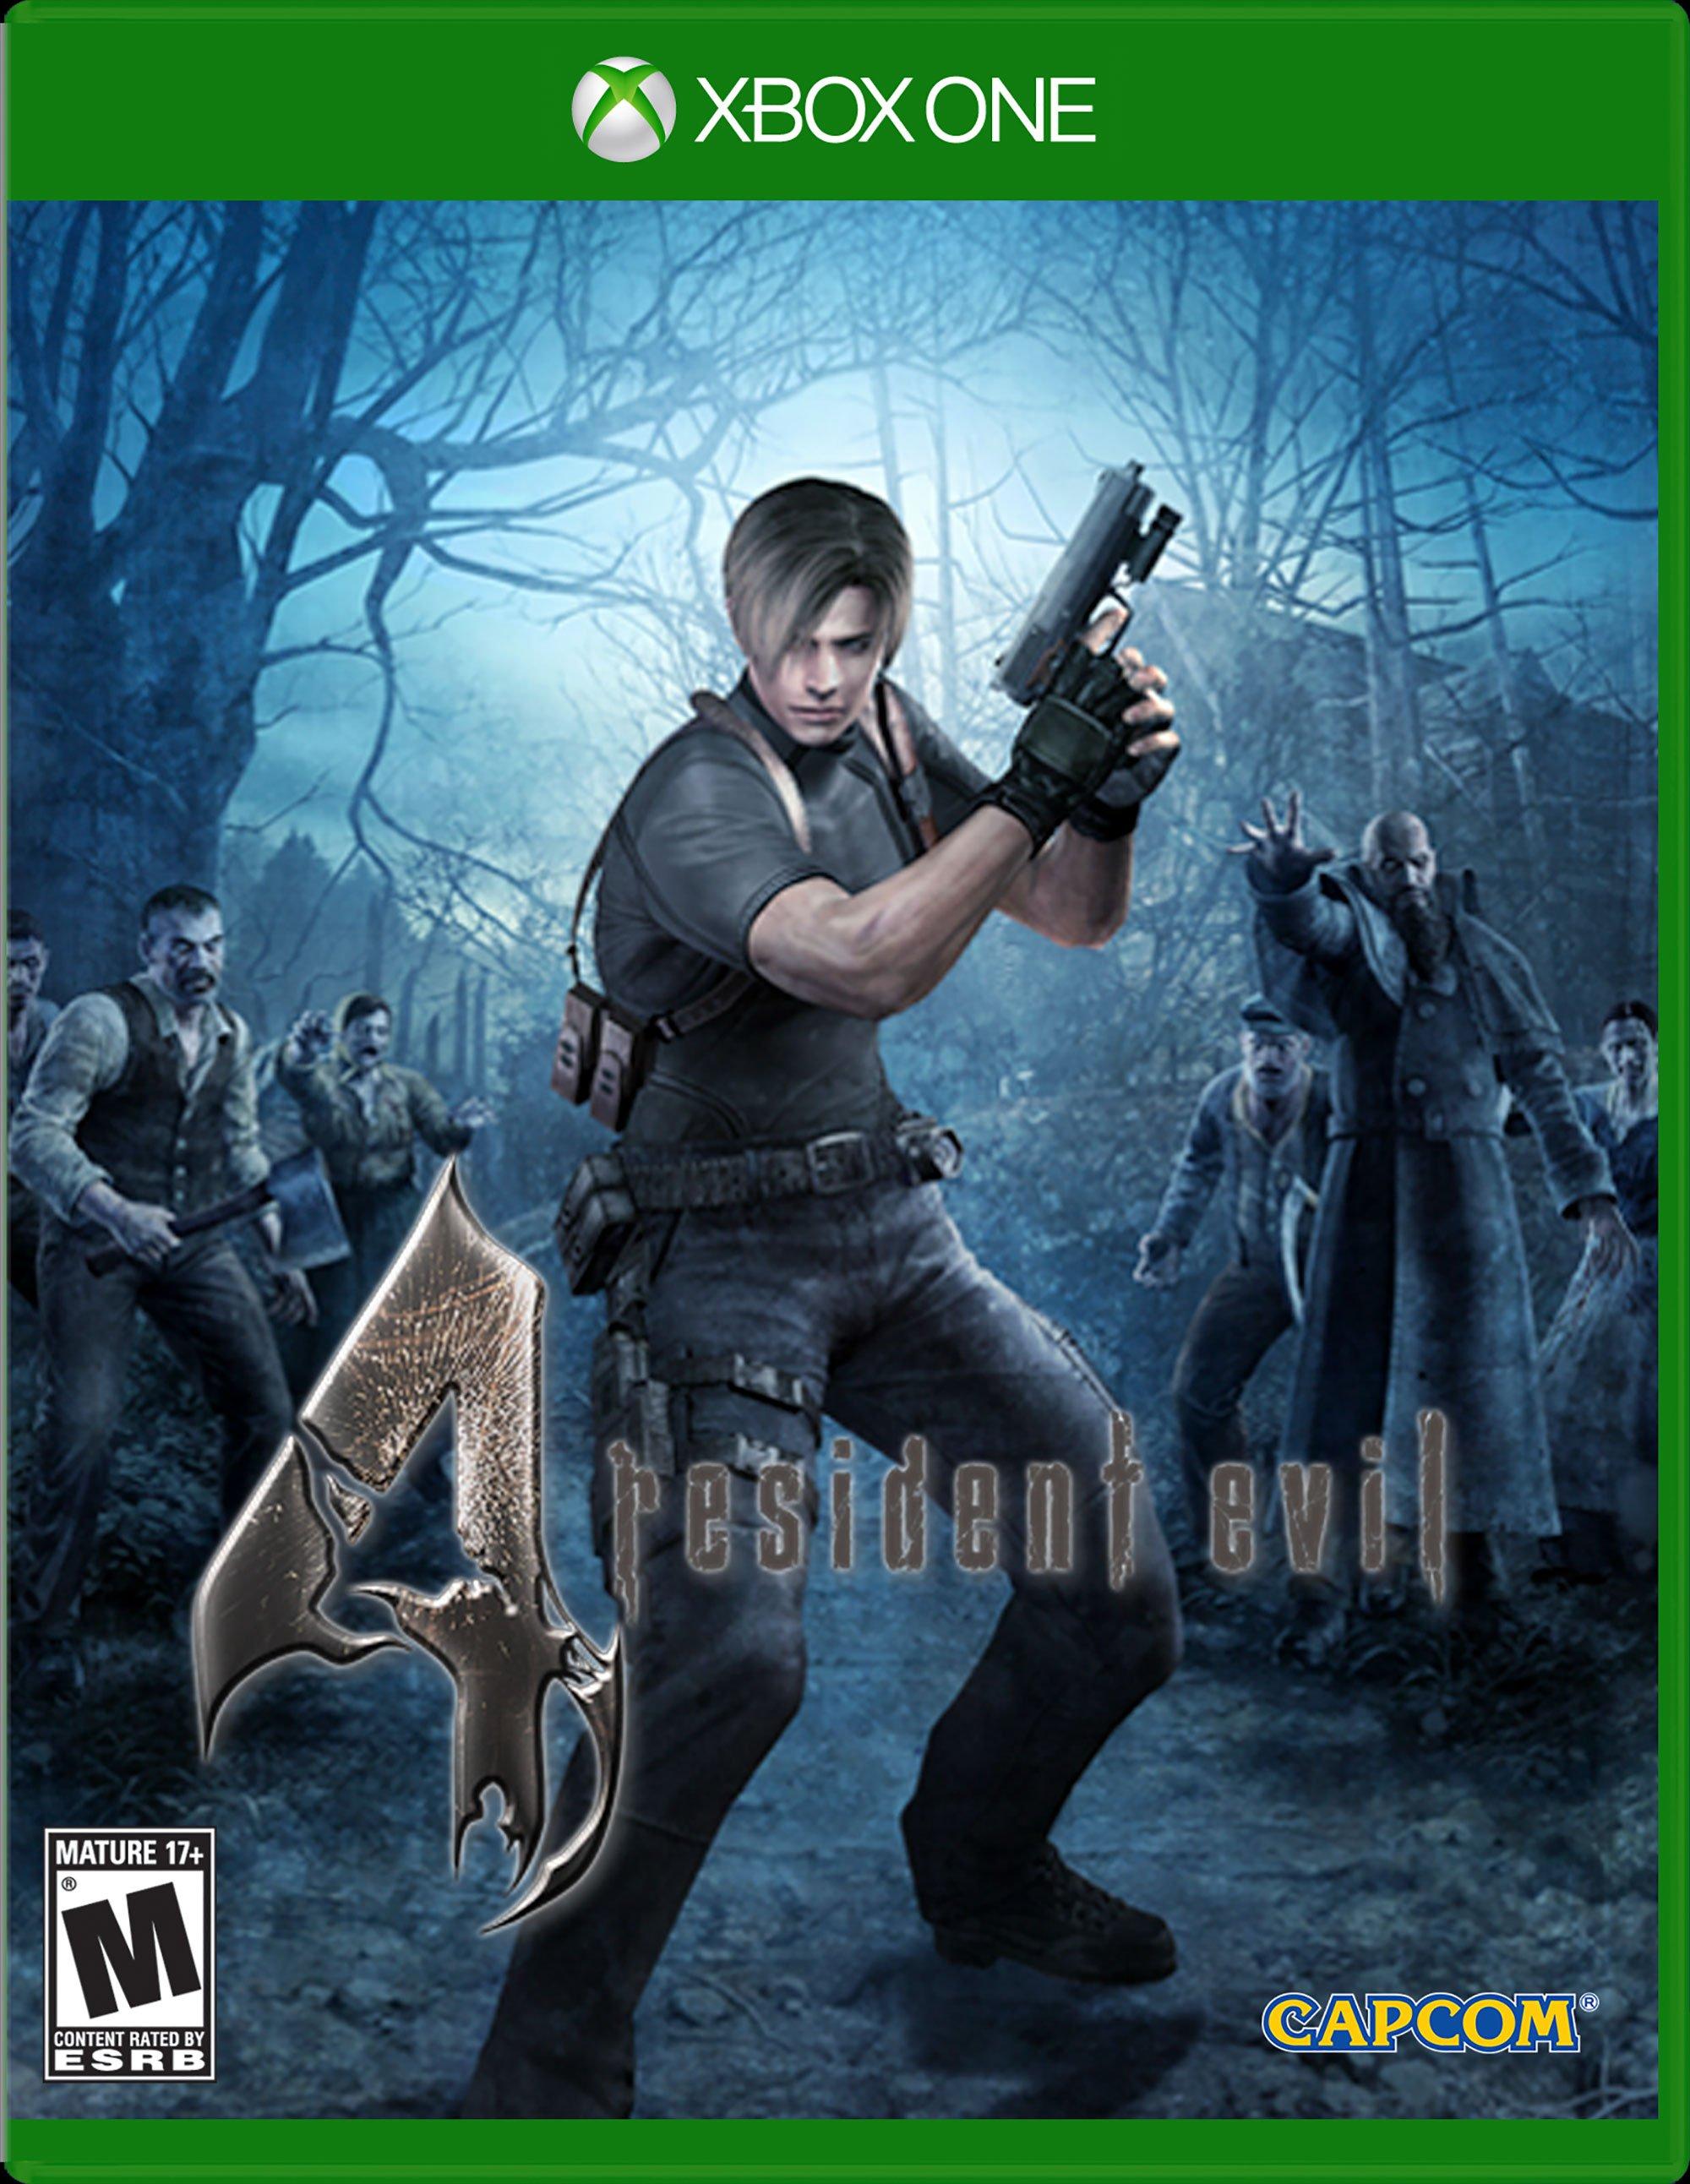 Resident Evil 4 remake is coming to PS4, but not Xbox One